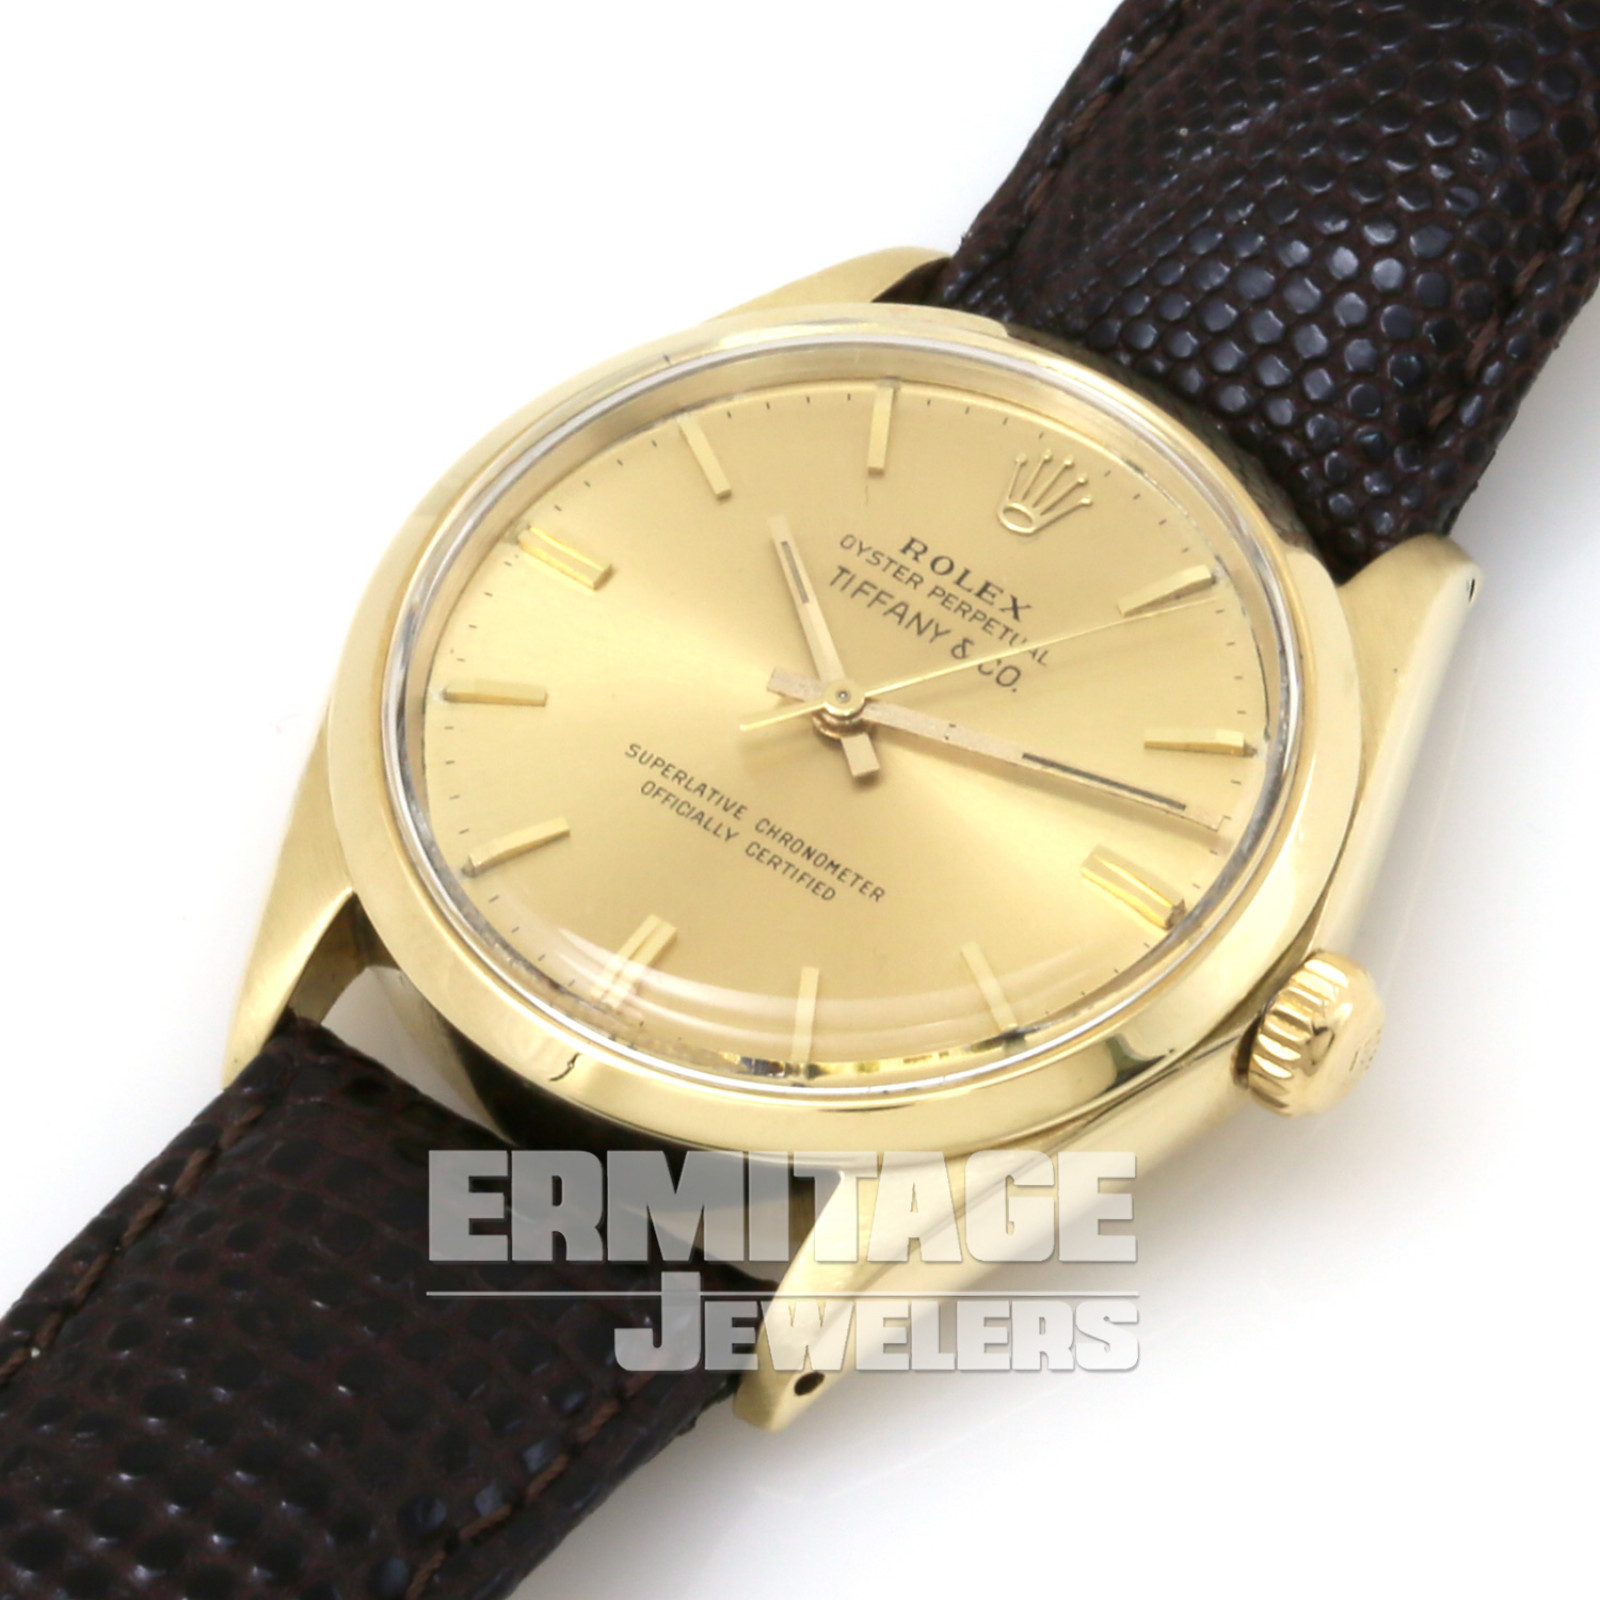 Vintage Rolex 1005 34 mm Yellow Gold on Strap, Smooth Bezel